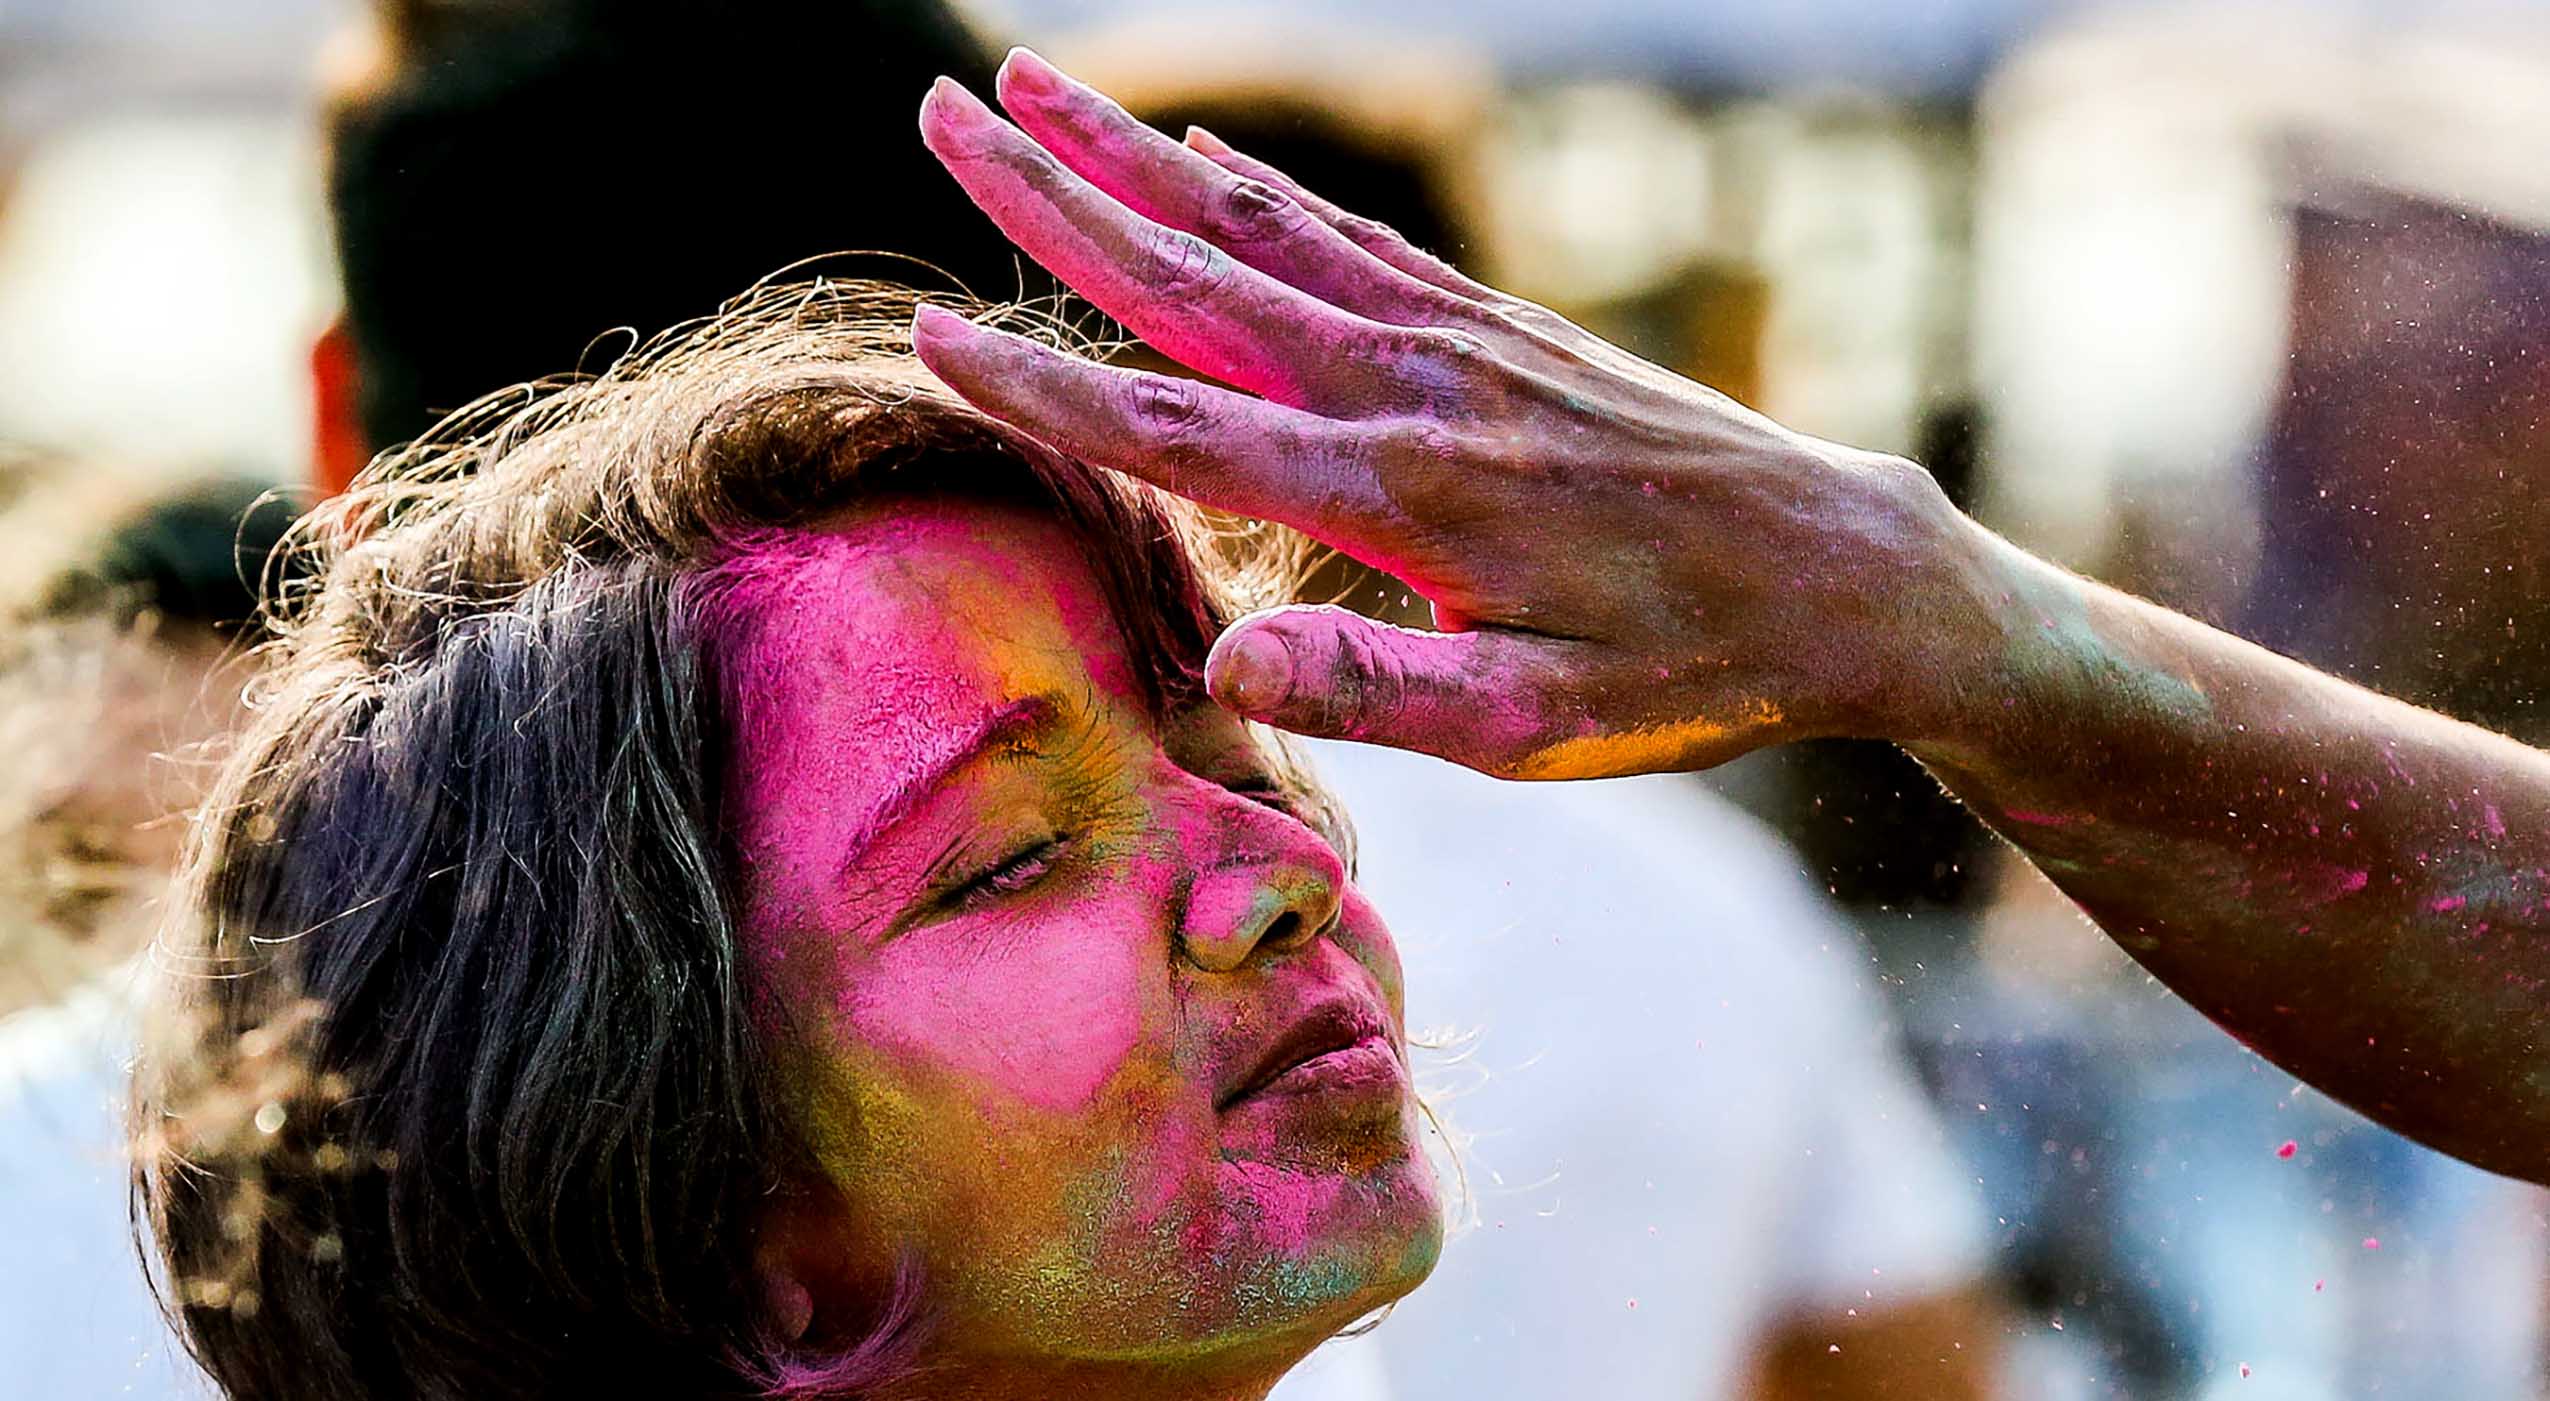 A woman takes part in the celebration during the Holi Festival in Pasay City, the Philippines, March 11, 2023. The Hindu festival Holi, also known as the 